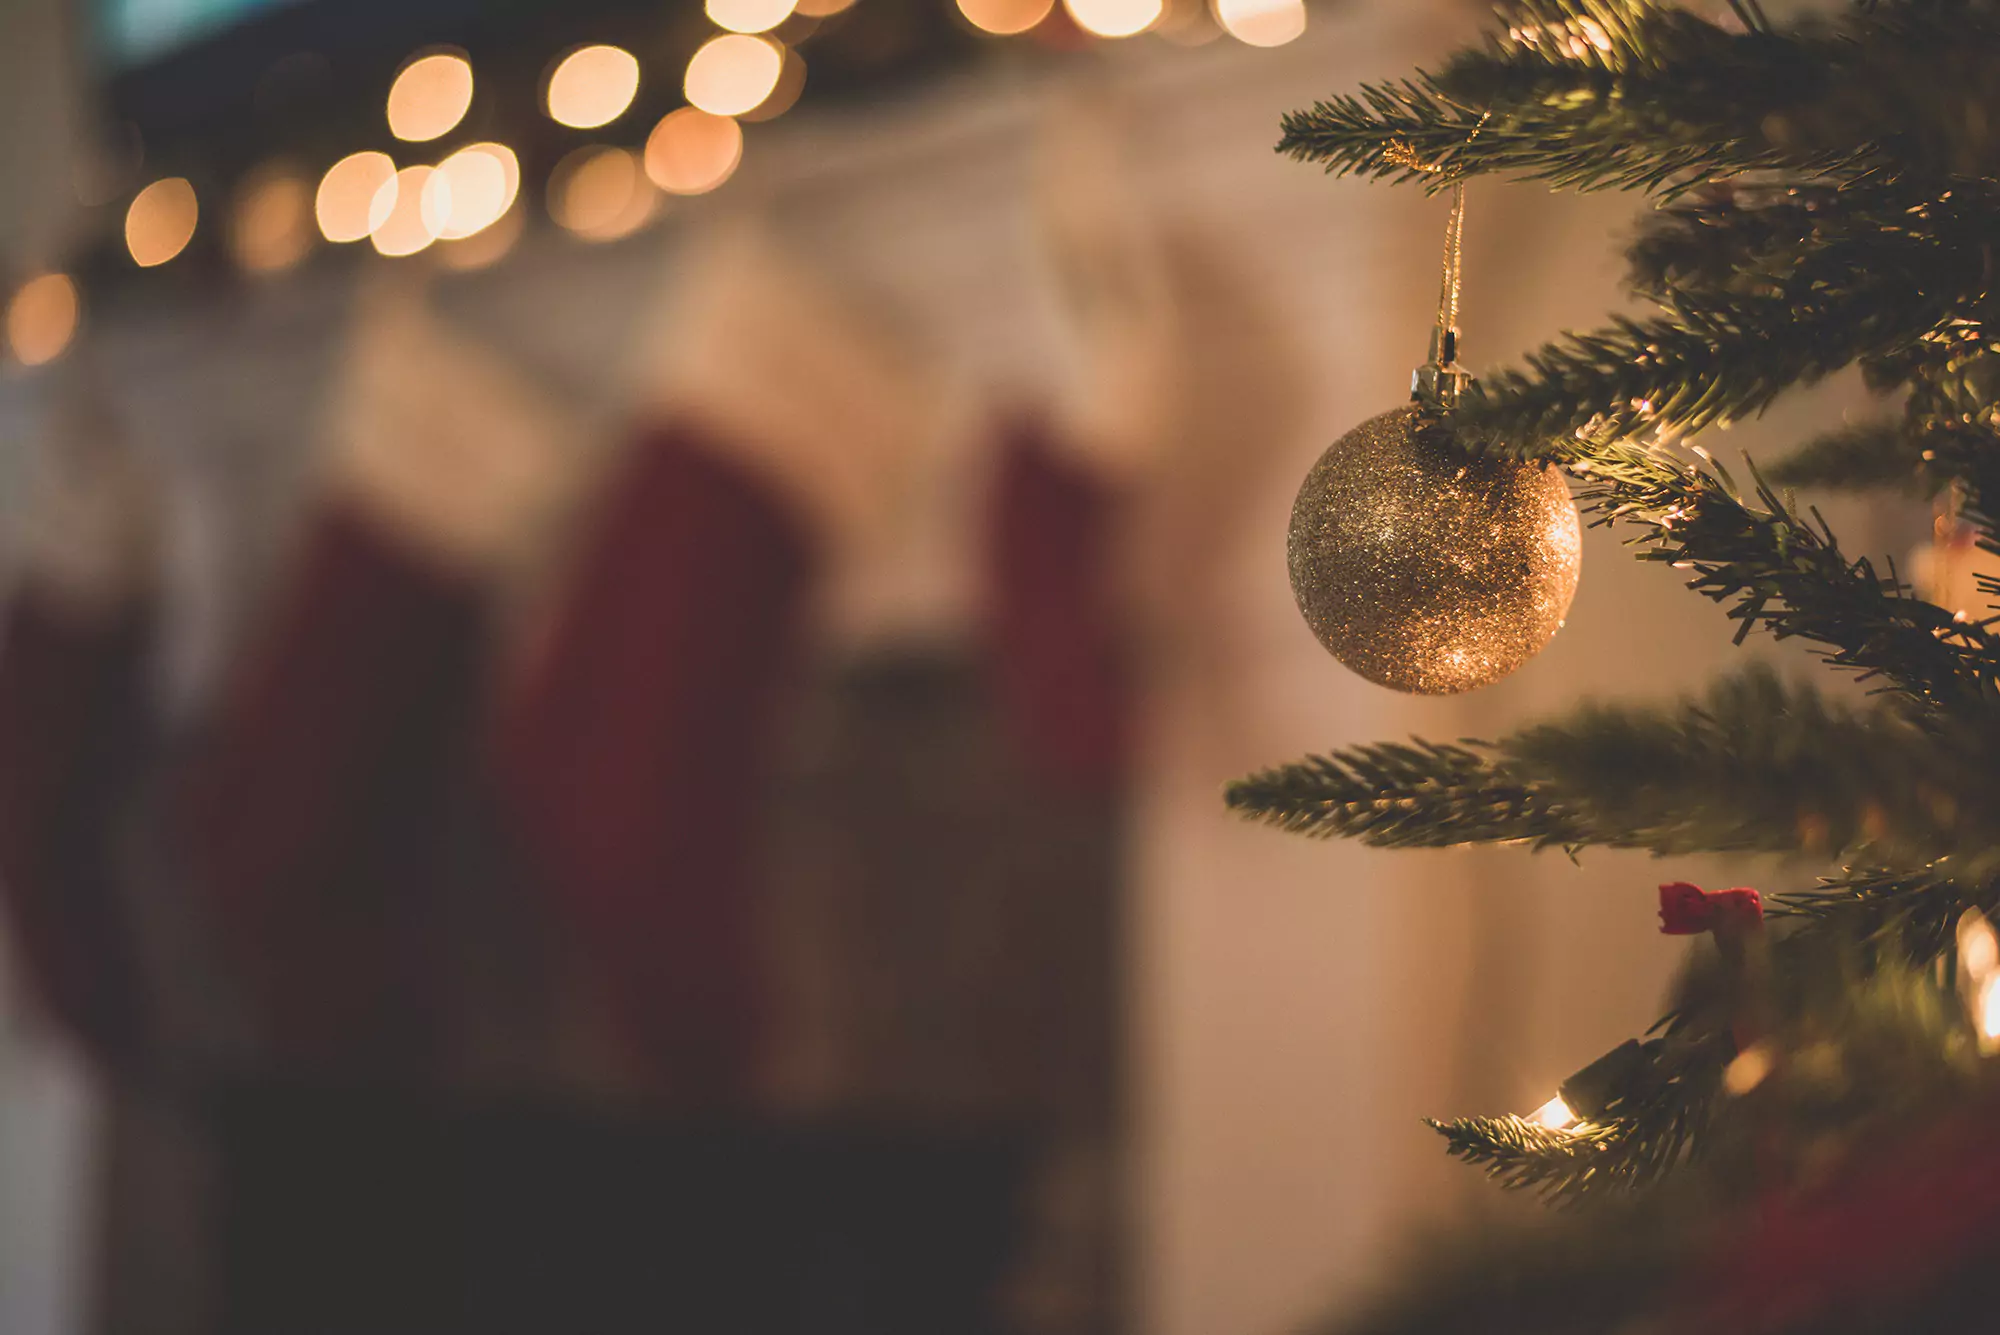 Christmas Tree with Gold Ornament in Blurred View